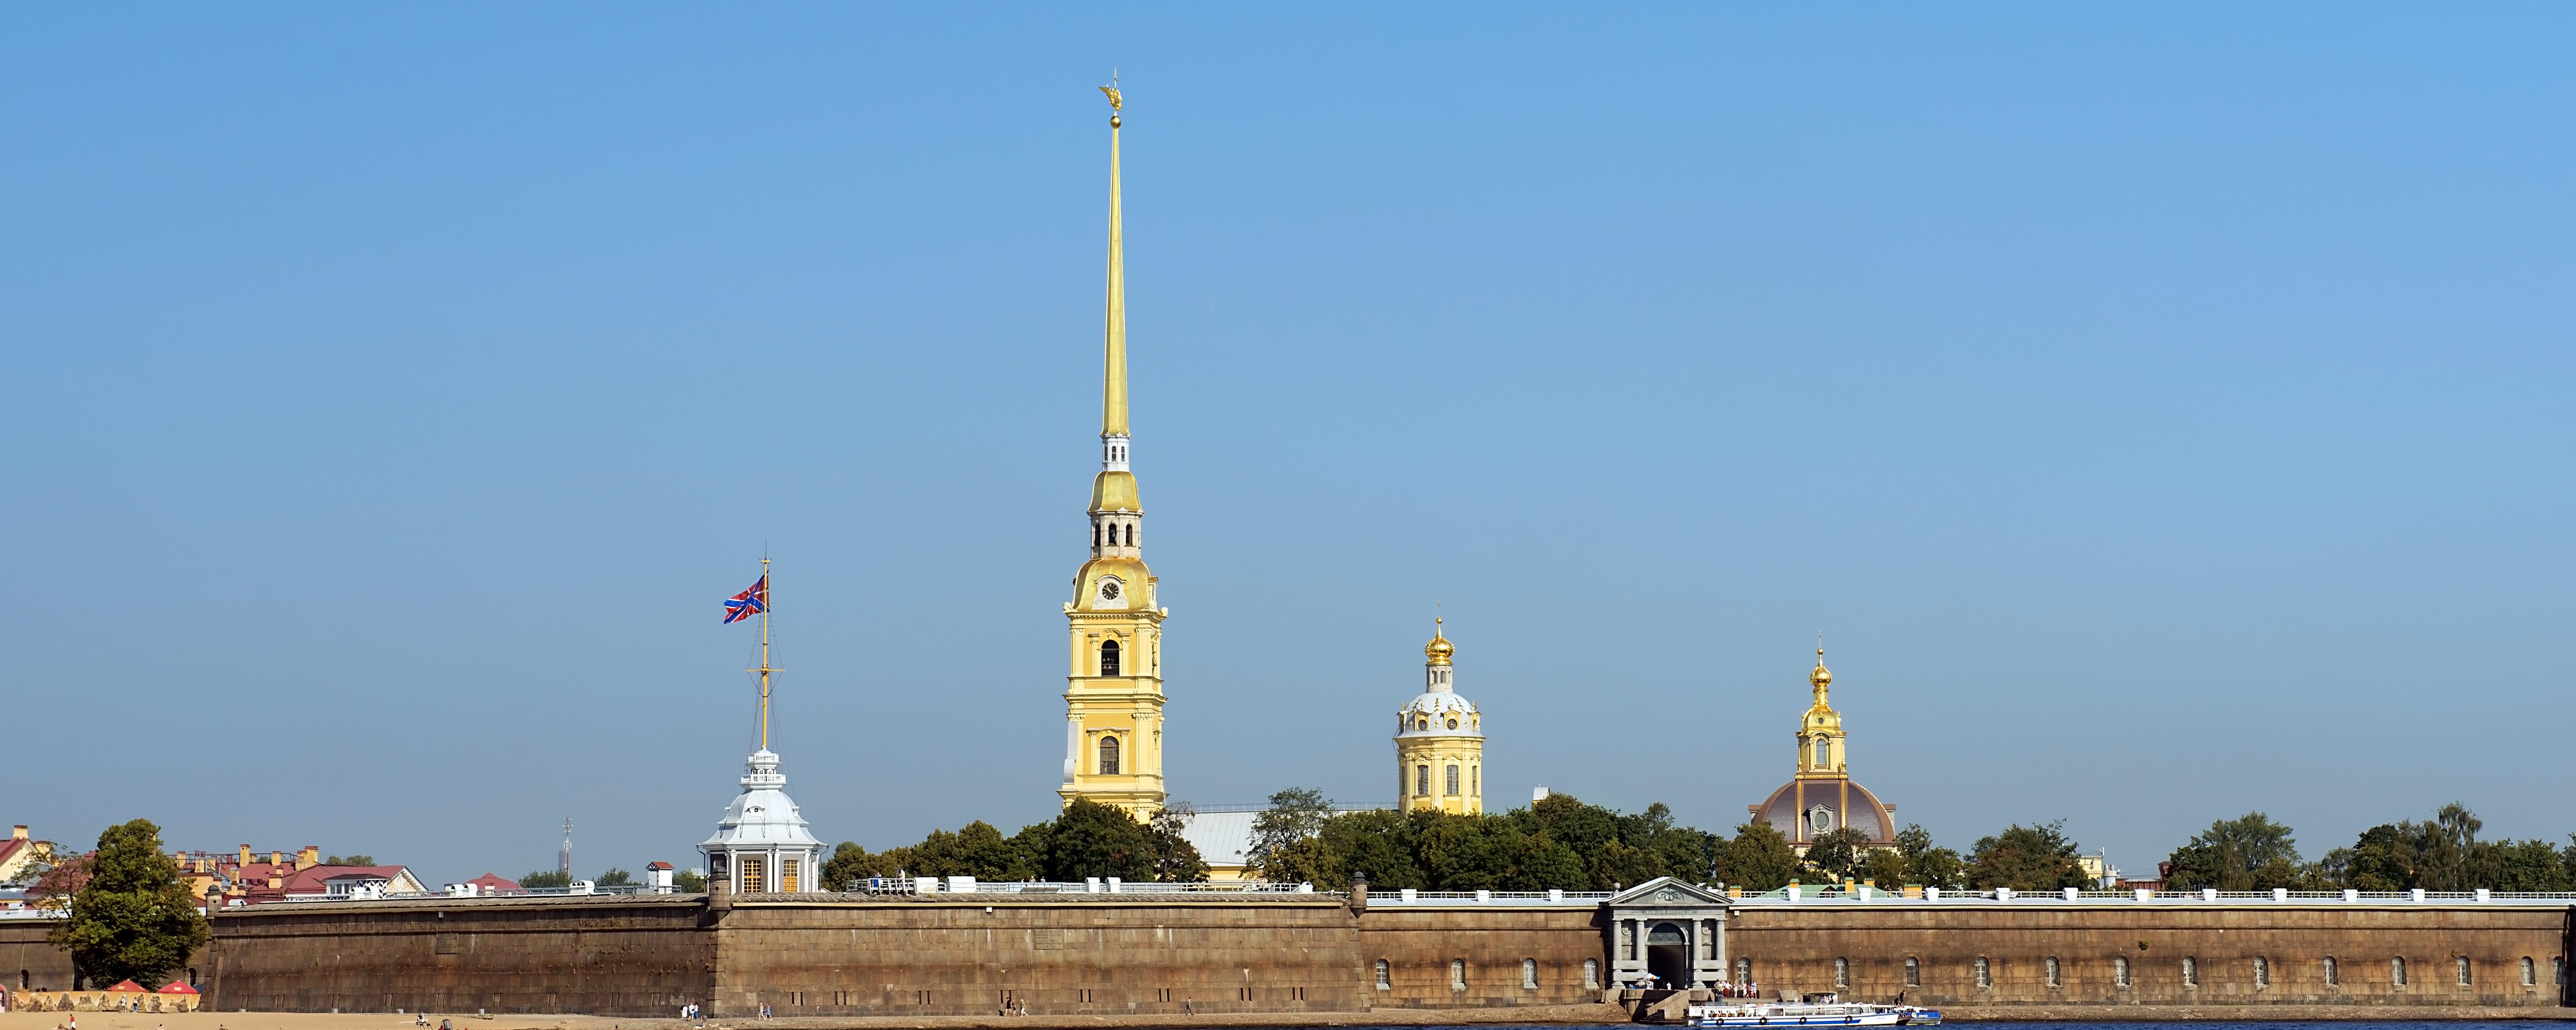 Private Guided Tour of The Pierre and Paul Fortress – Hotel transfer